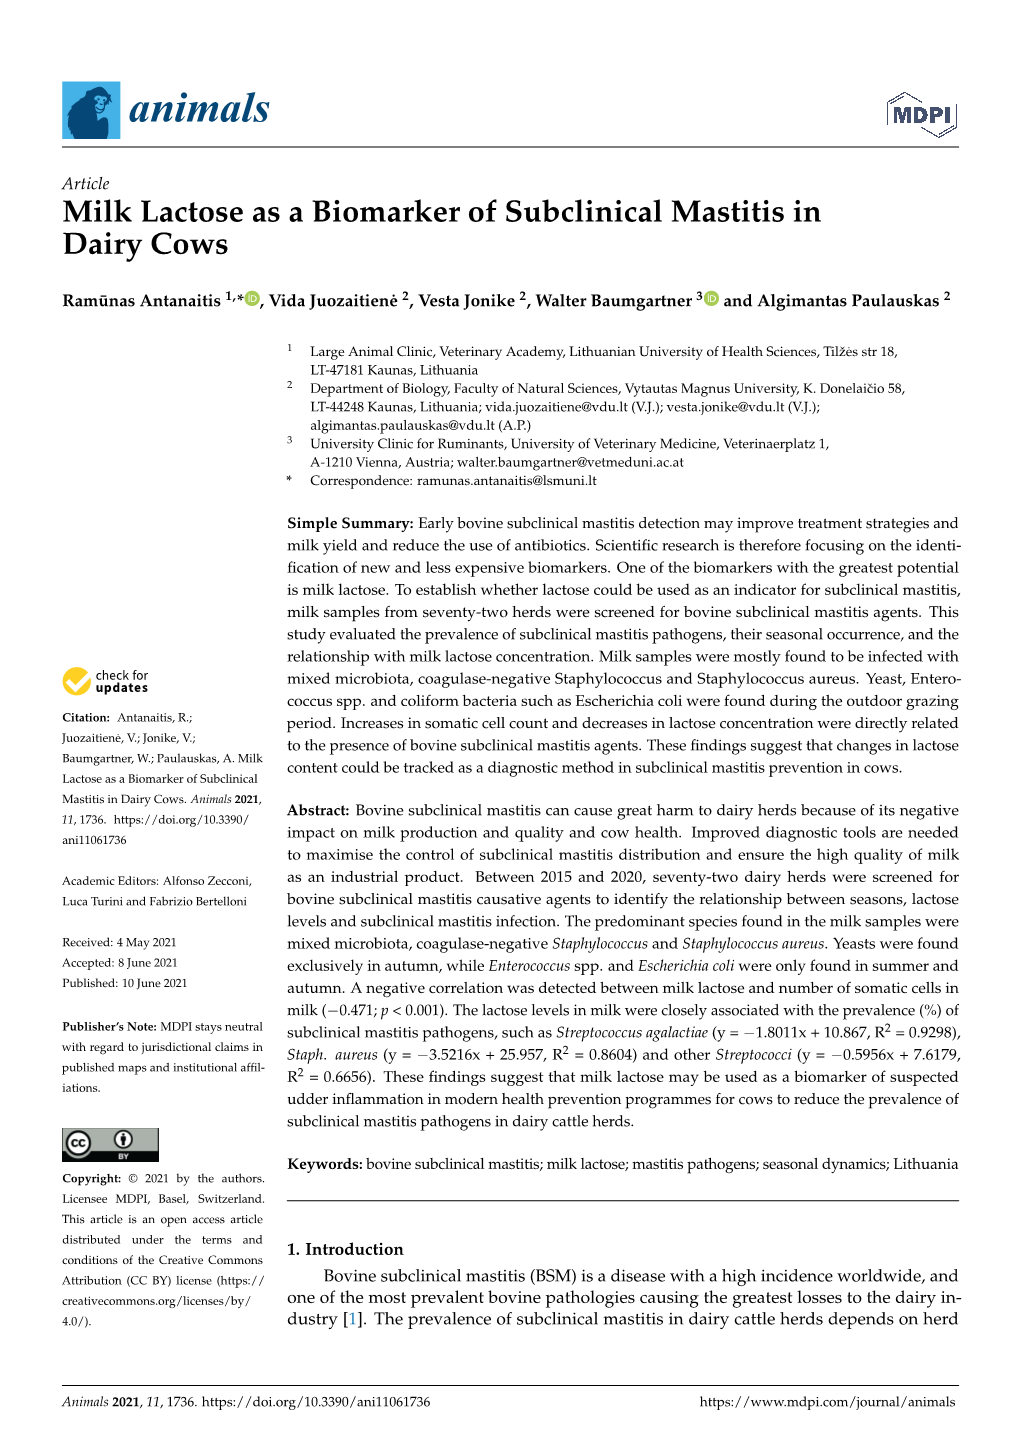 Milk Lactose As a Biomarker of Subclinical Mastitis in Dairy Cows